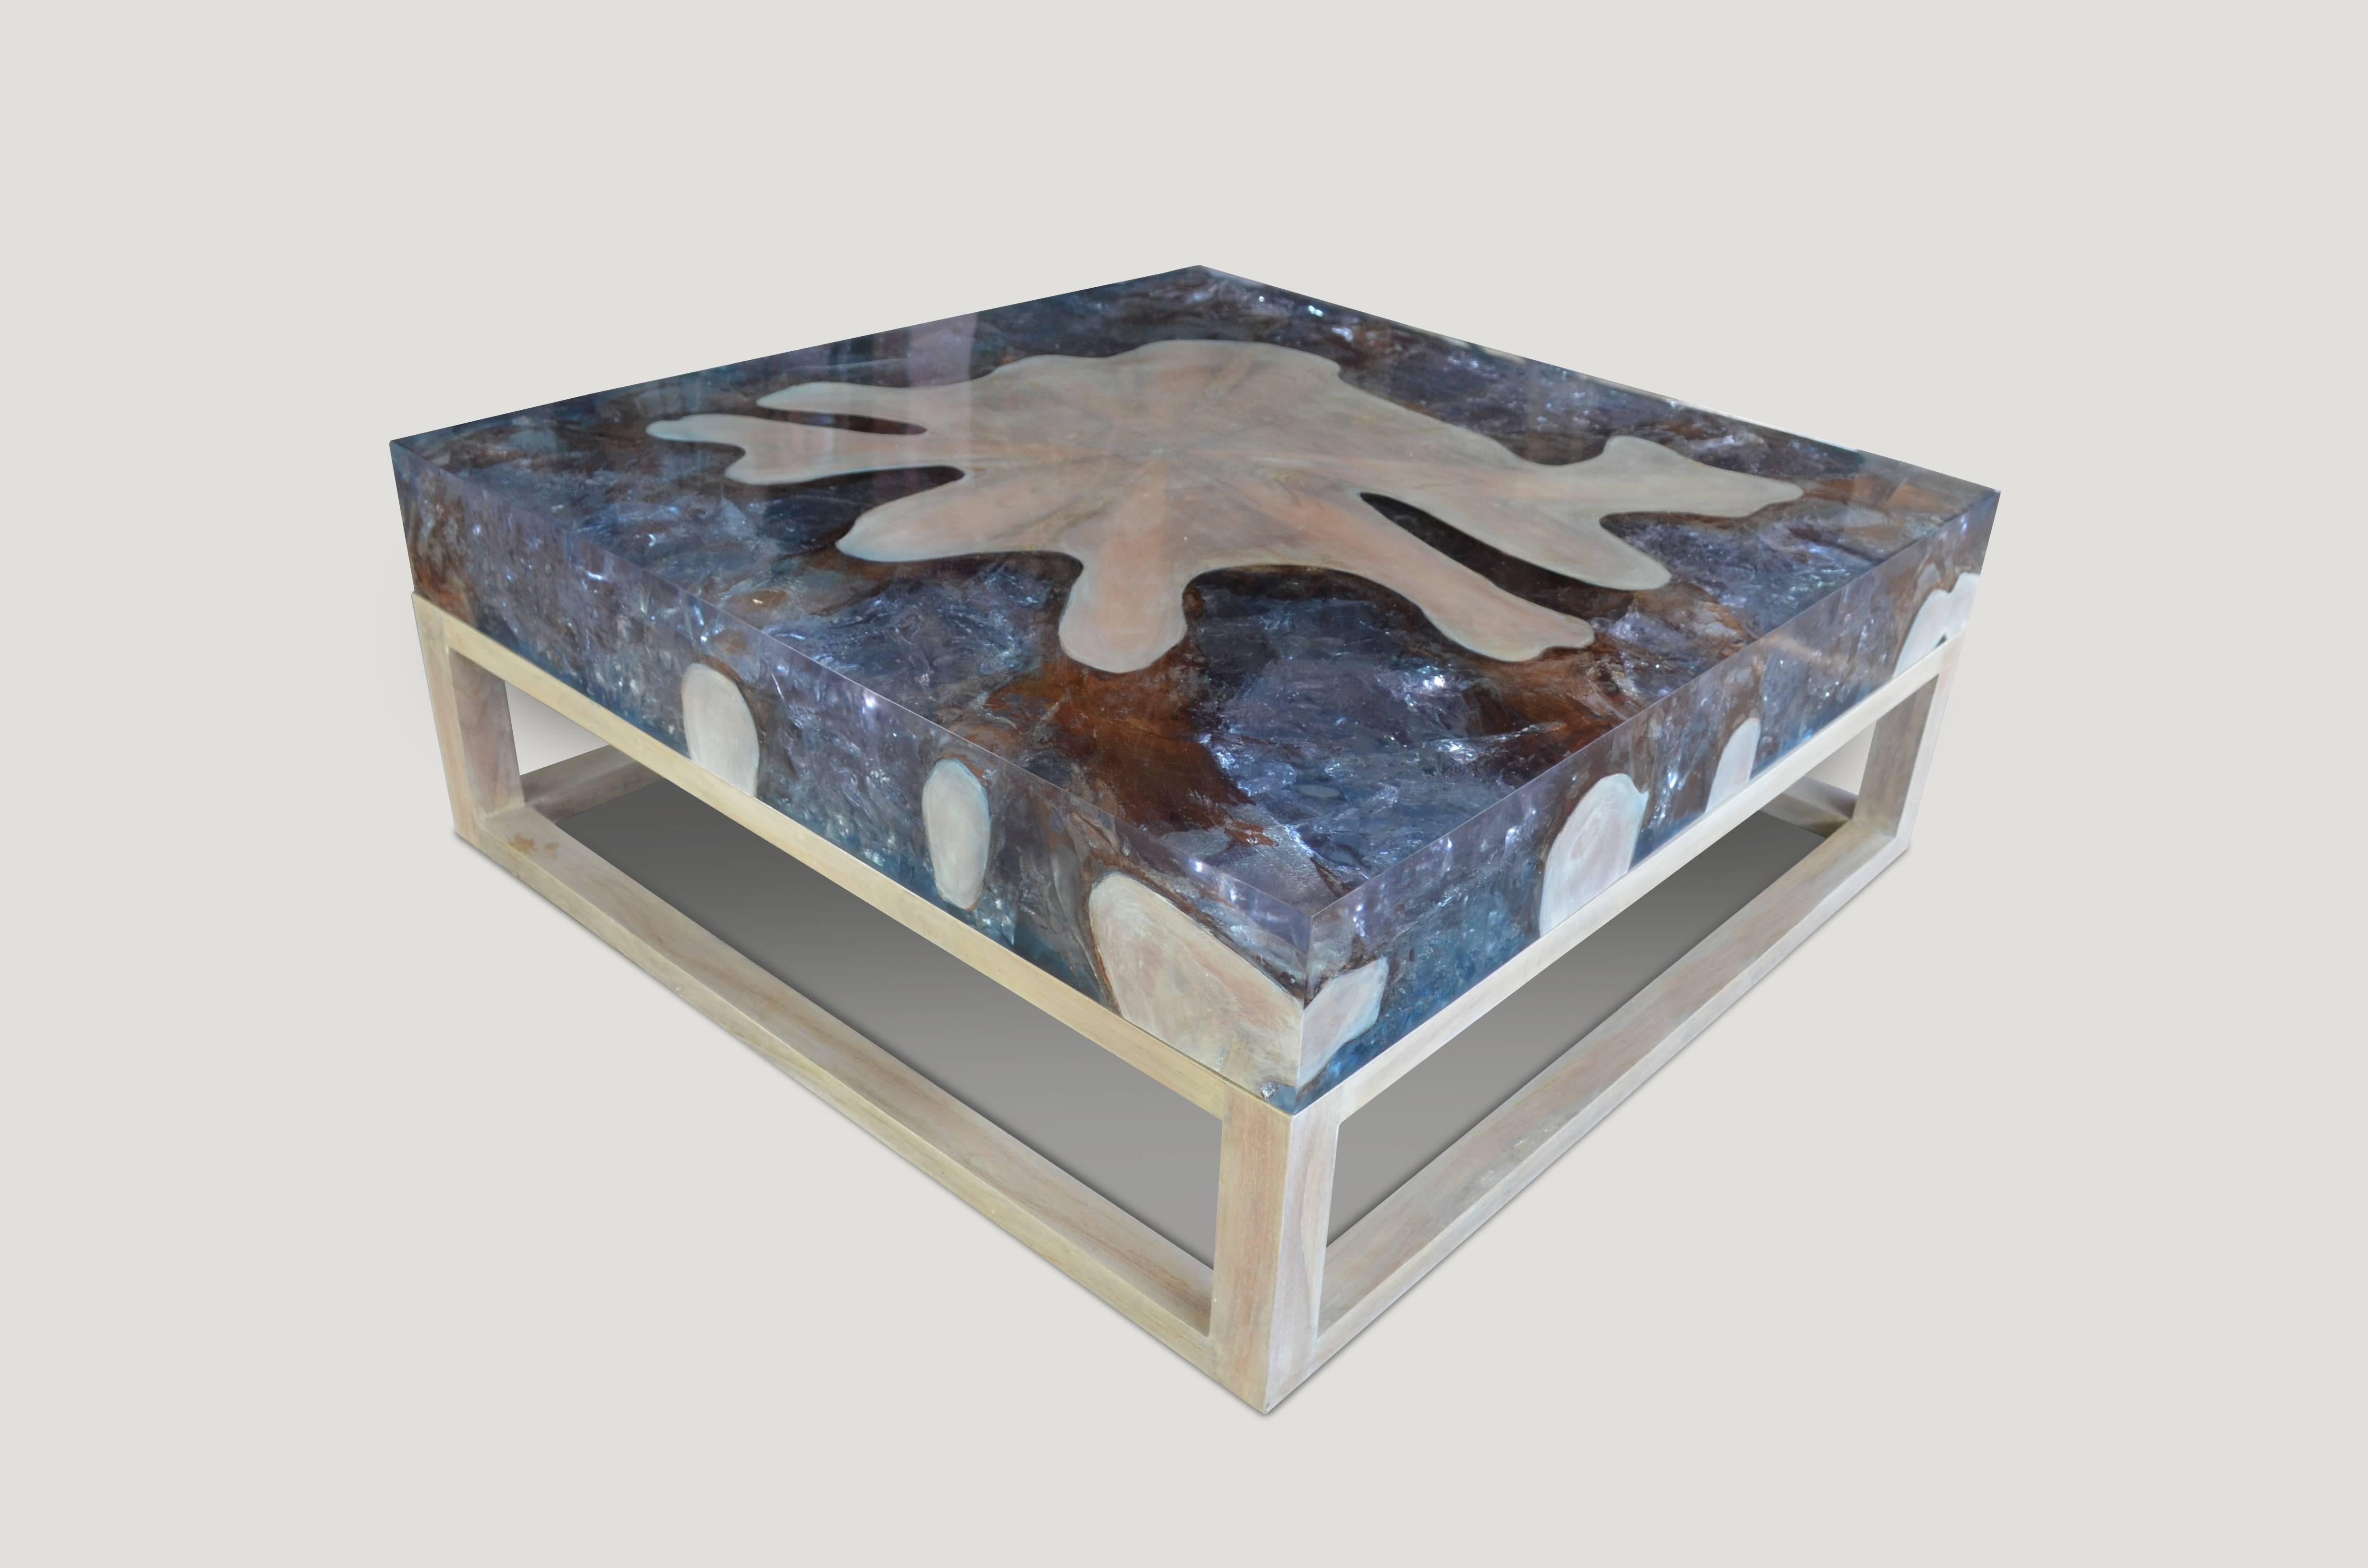 This St. Barts coffee table is made from reclaimed teak infused with aqua resin, which resembles a unique quartz crystal with many different facets, as shown here with gold, warm tones created naturally within the wood. Straight modern lines with a